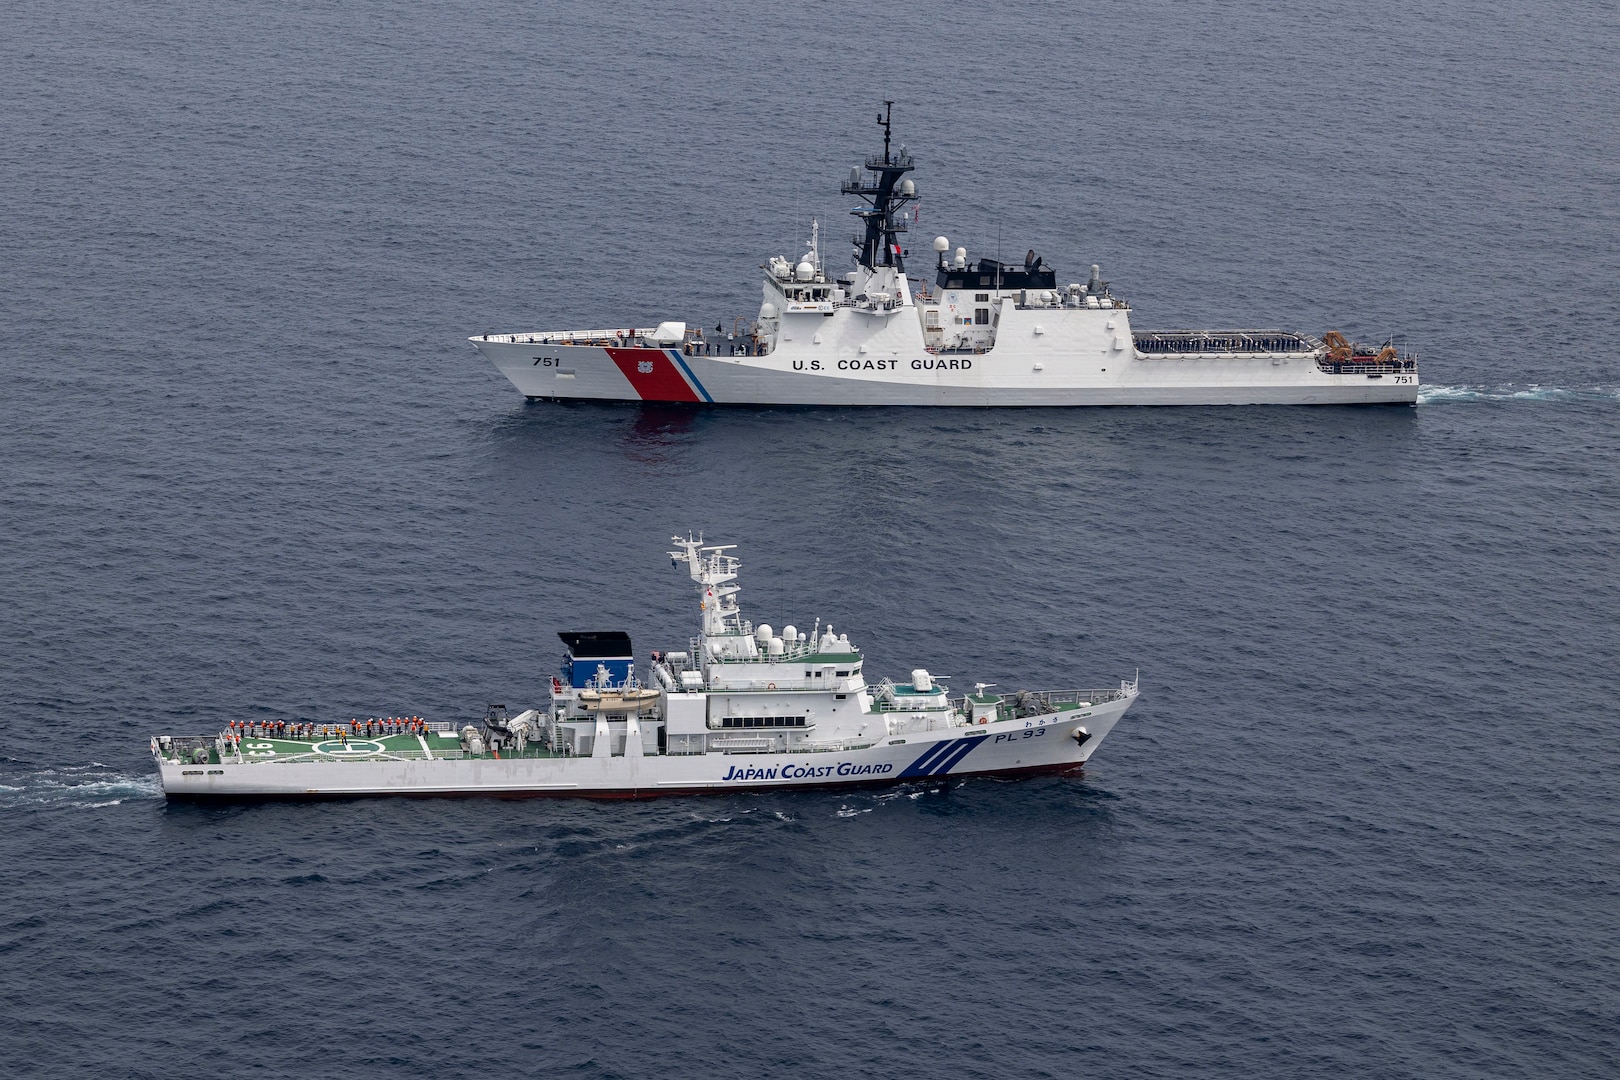 U.S. Coast Guard Cutter Waesche (WMSL-751) and Japan Coast Guard vessel JCGC Wakasa (PL-93) pass during a trilateral search and rescue exercise in the East Sea, June 6, 2024. Coast Guardsmen from Japan, Republic of Korea and the United States used the trilateral exercise as an opportunity to rehearse cohesion between the nations when operating together. The U.S. Coast Guard has operated in the Indo-Pacific for more than 150 years, and the service is increasing efforts through targeted patrols with our National Security Cutters, Fast Response Cutters and other activities in support of Coast Guard missions to enhance our partnership. (U.S. Marine Corps photo by Cpl. Elijah Murphy)